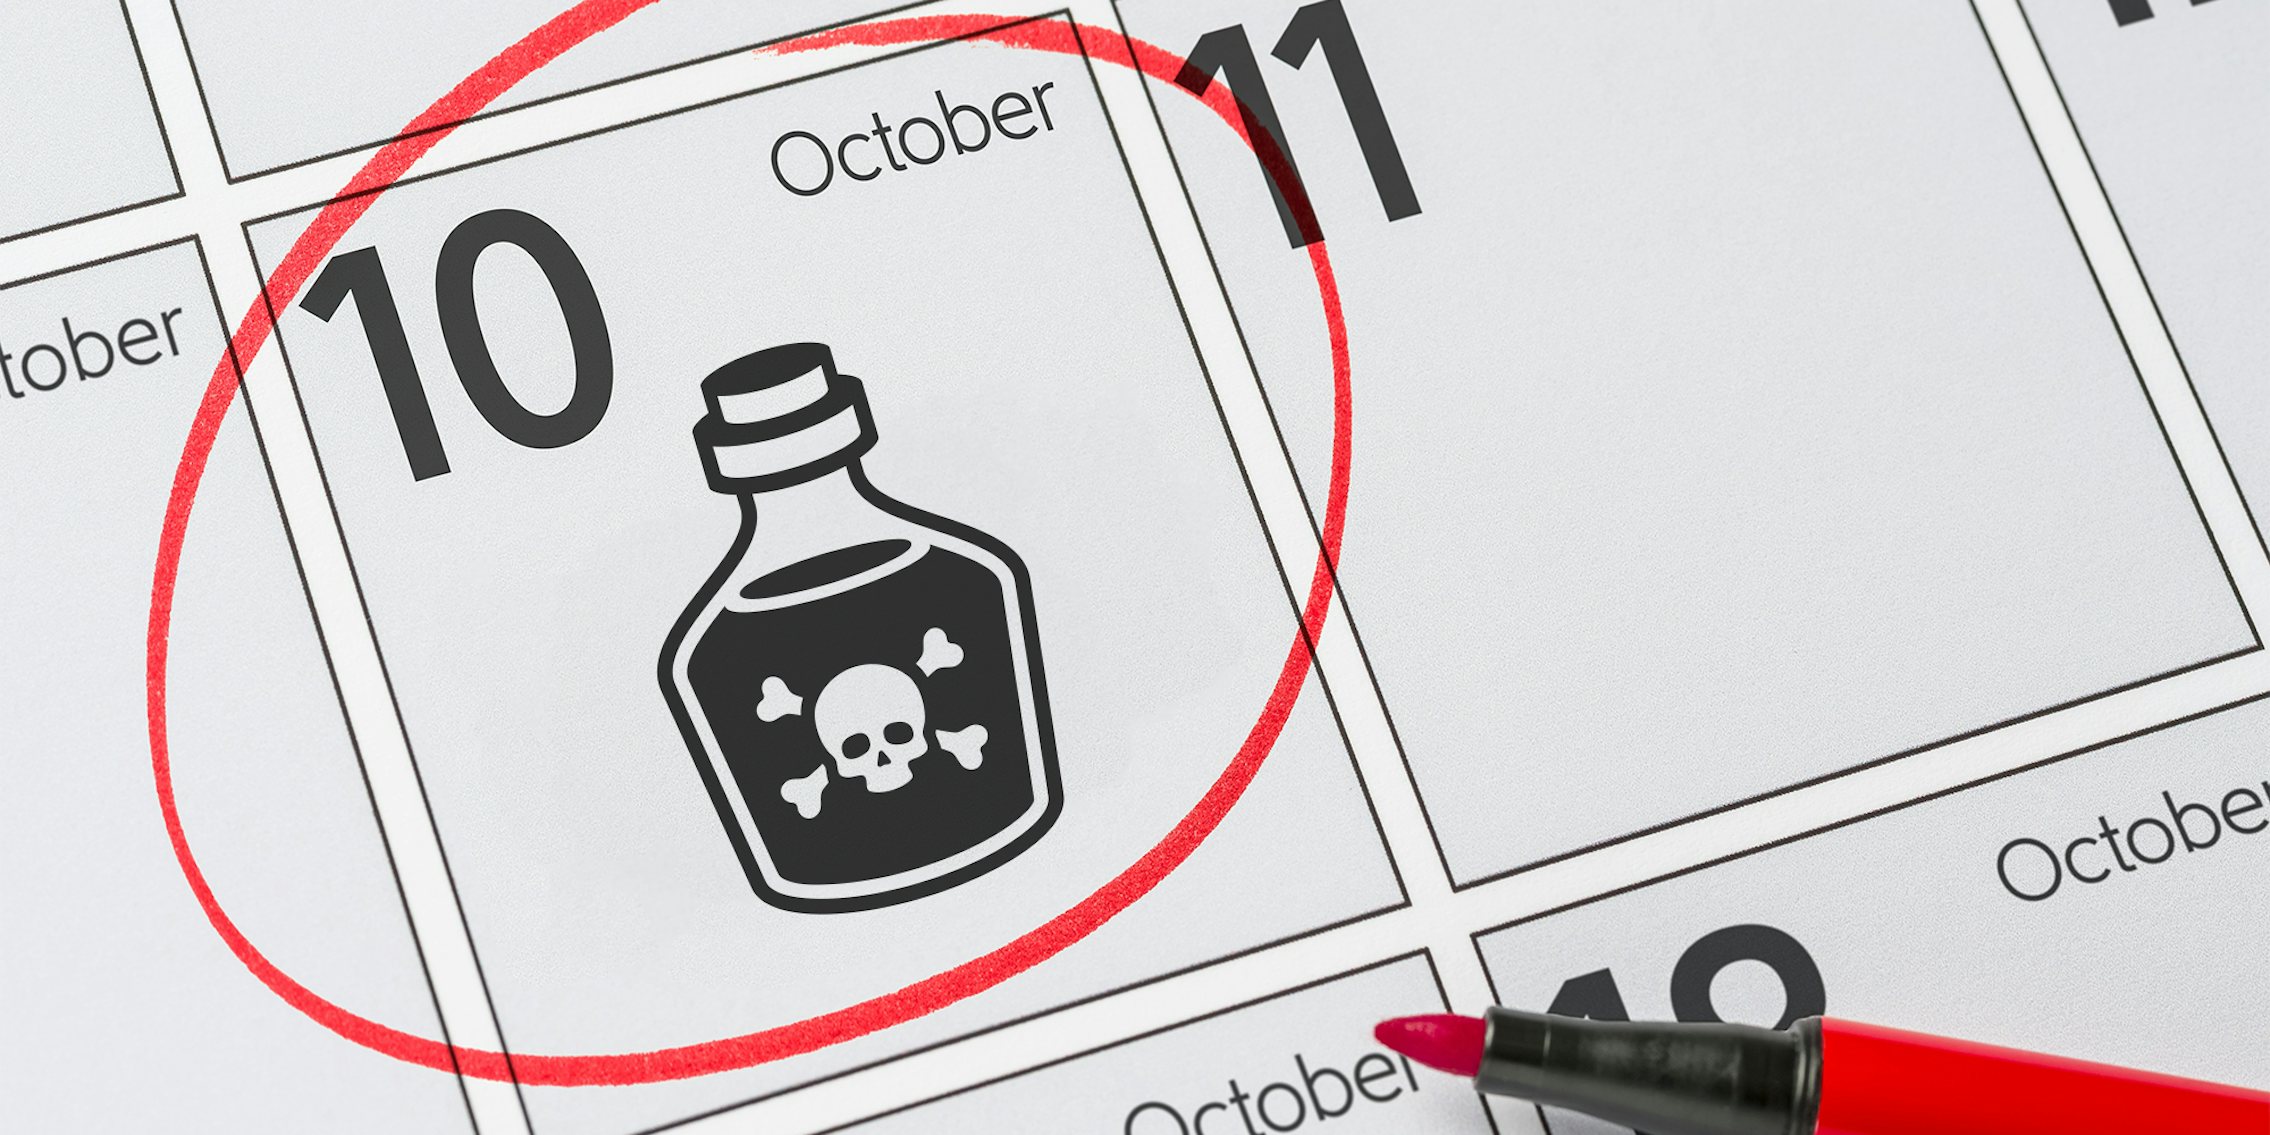 October 10th on calendar with poison bottle icon, circled in red pen